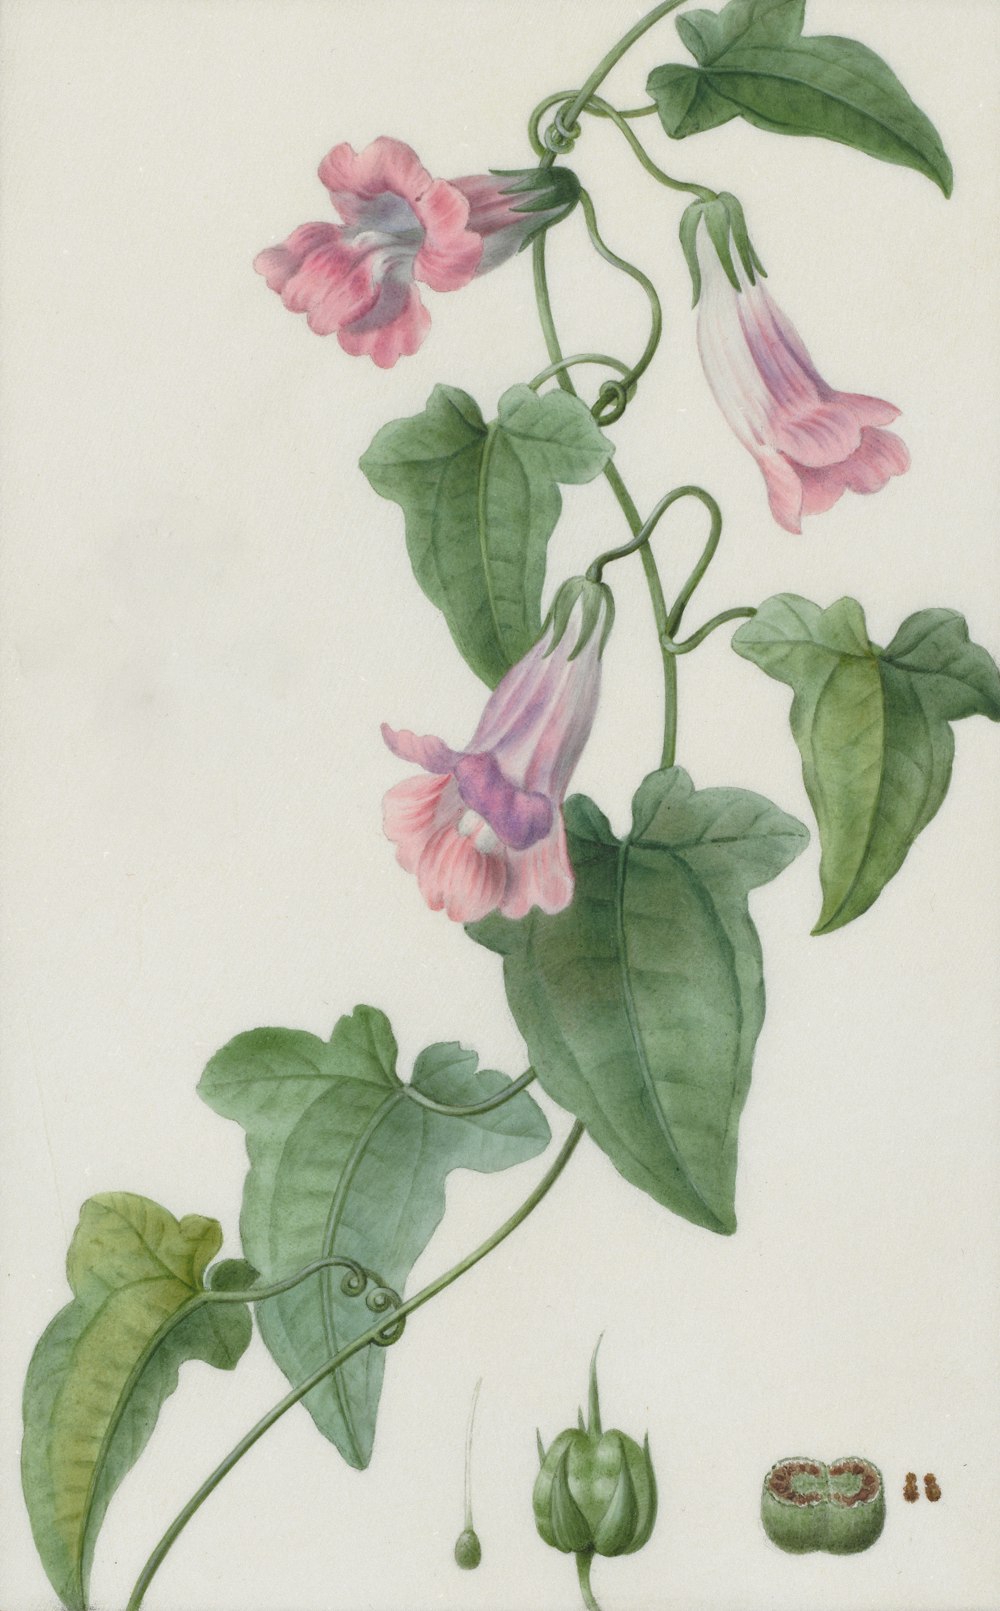 a painting of a plant with pink flowers and green leaves